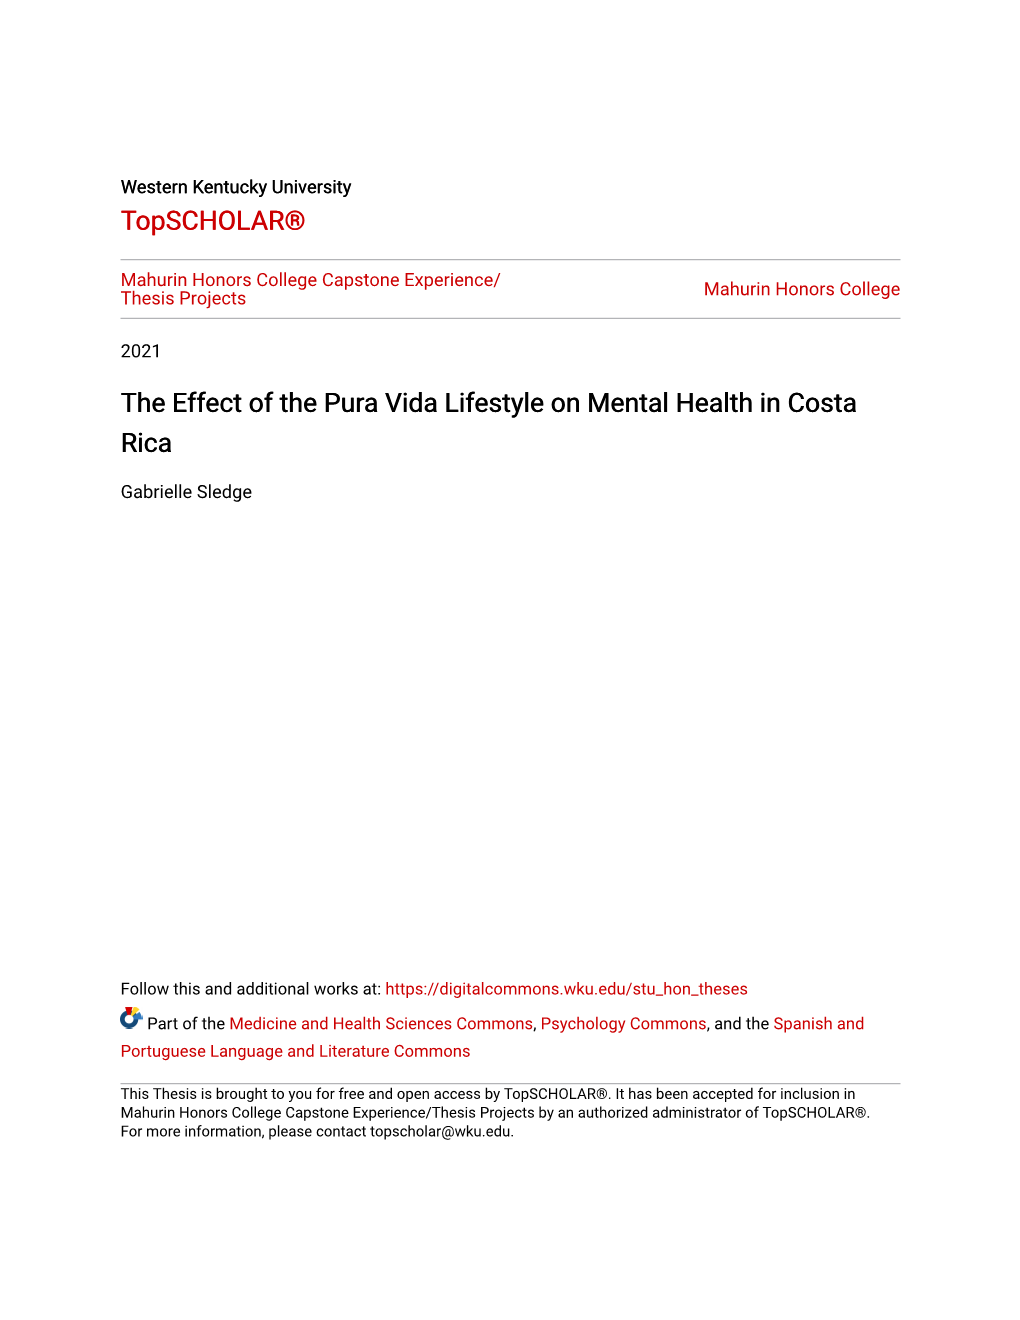 The Effect of the Pura Vida Lifestyle on Mental Health in Costa Rica